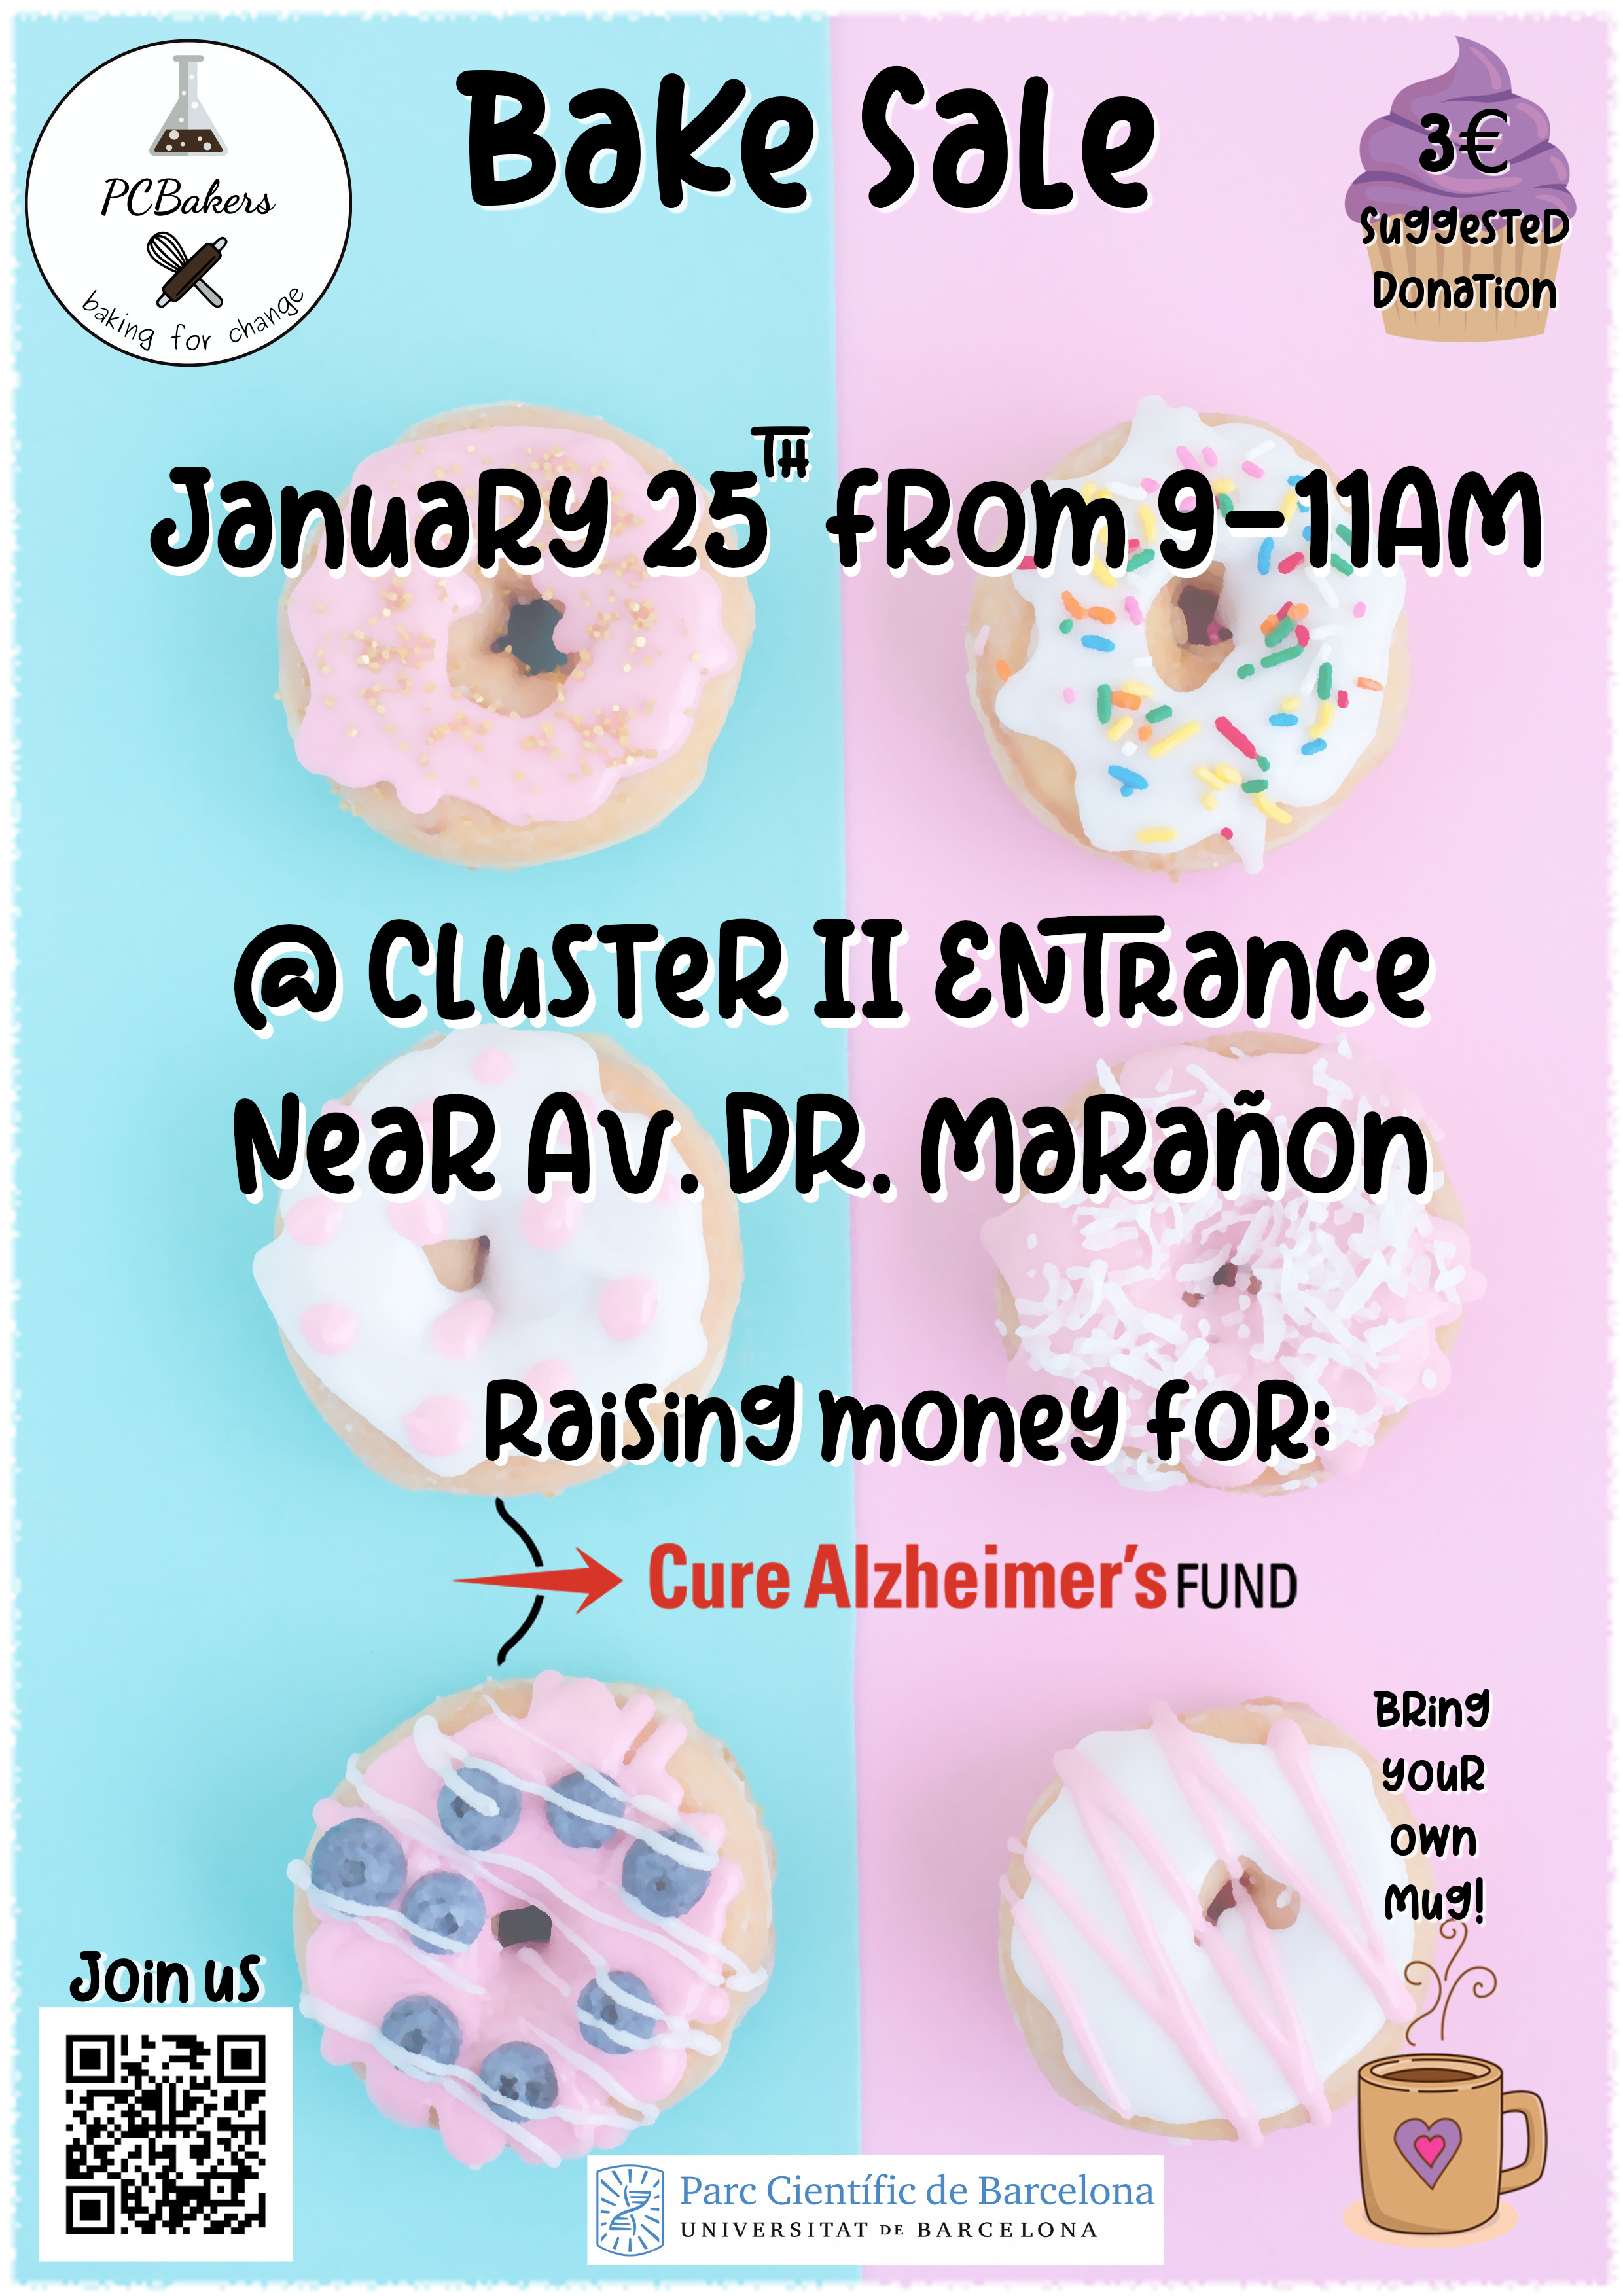 Bake Sale January 25th - Cure Alzheimer's Fund